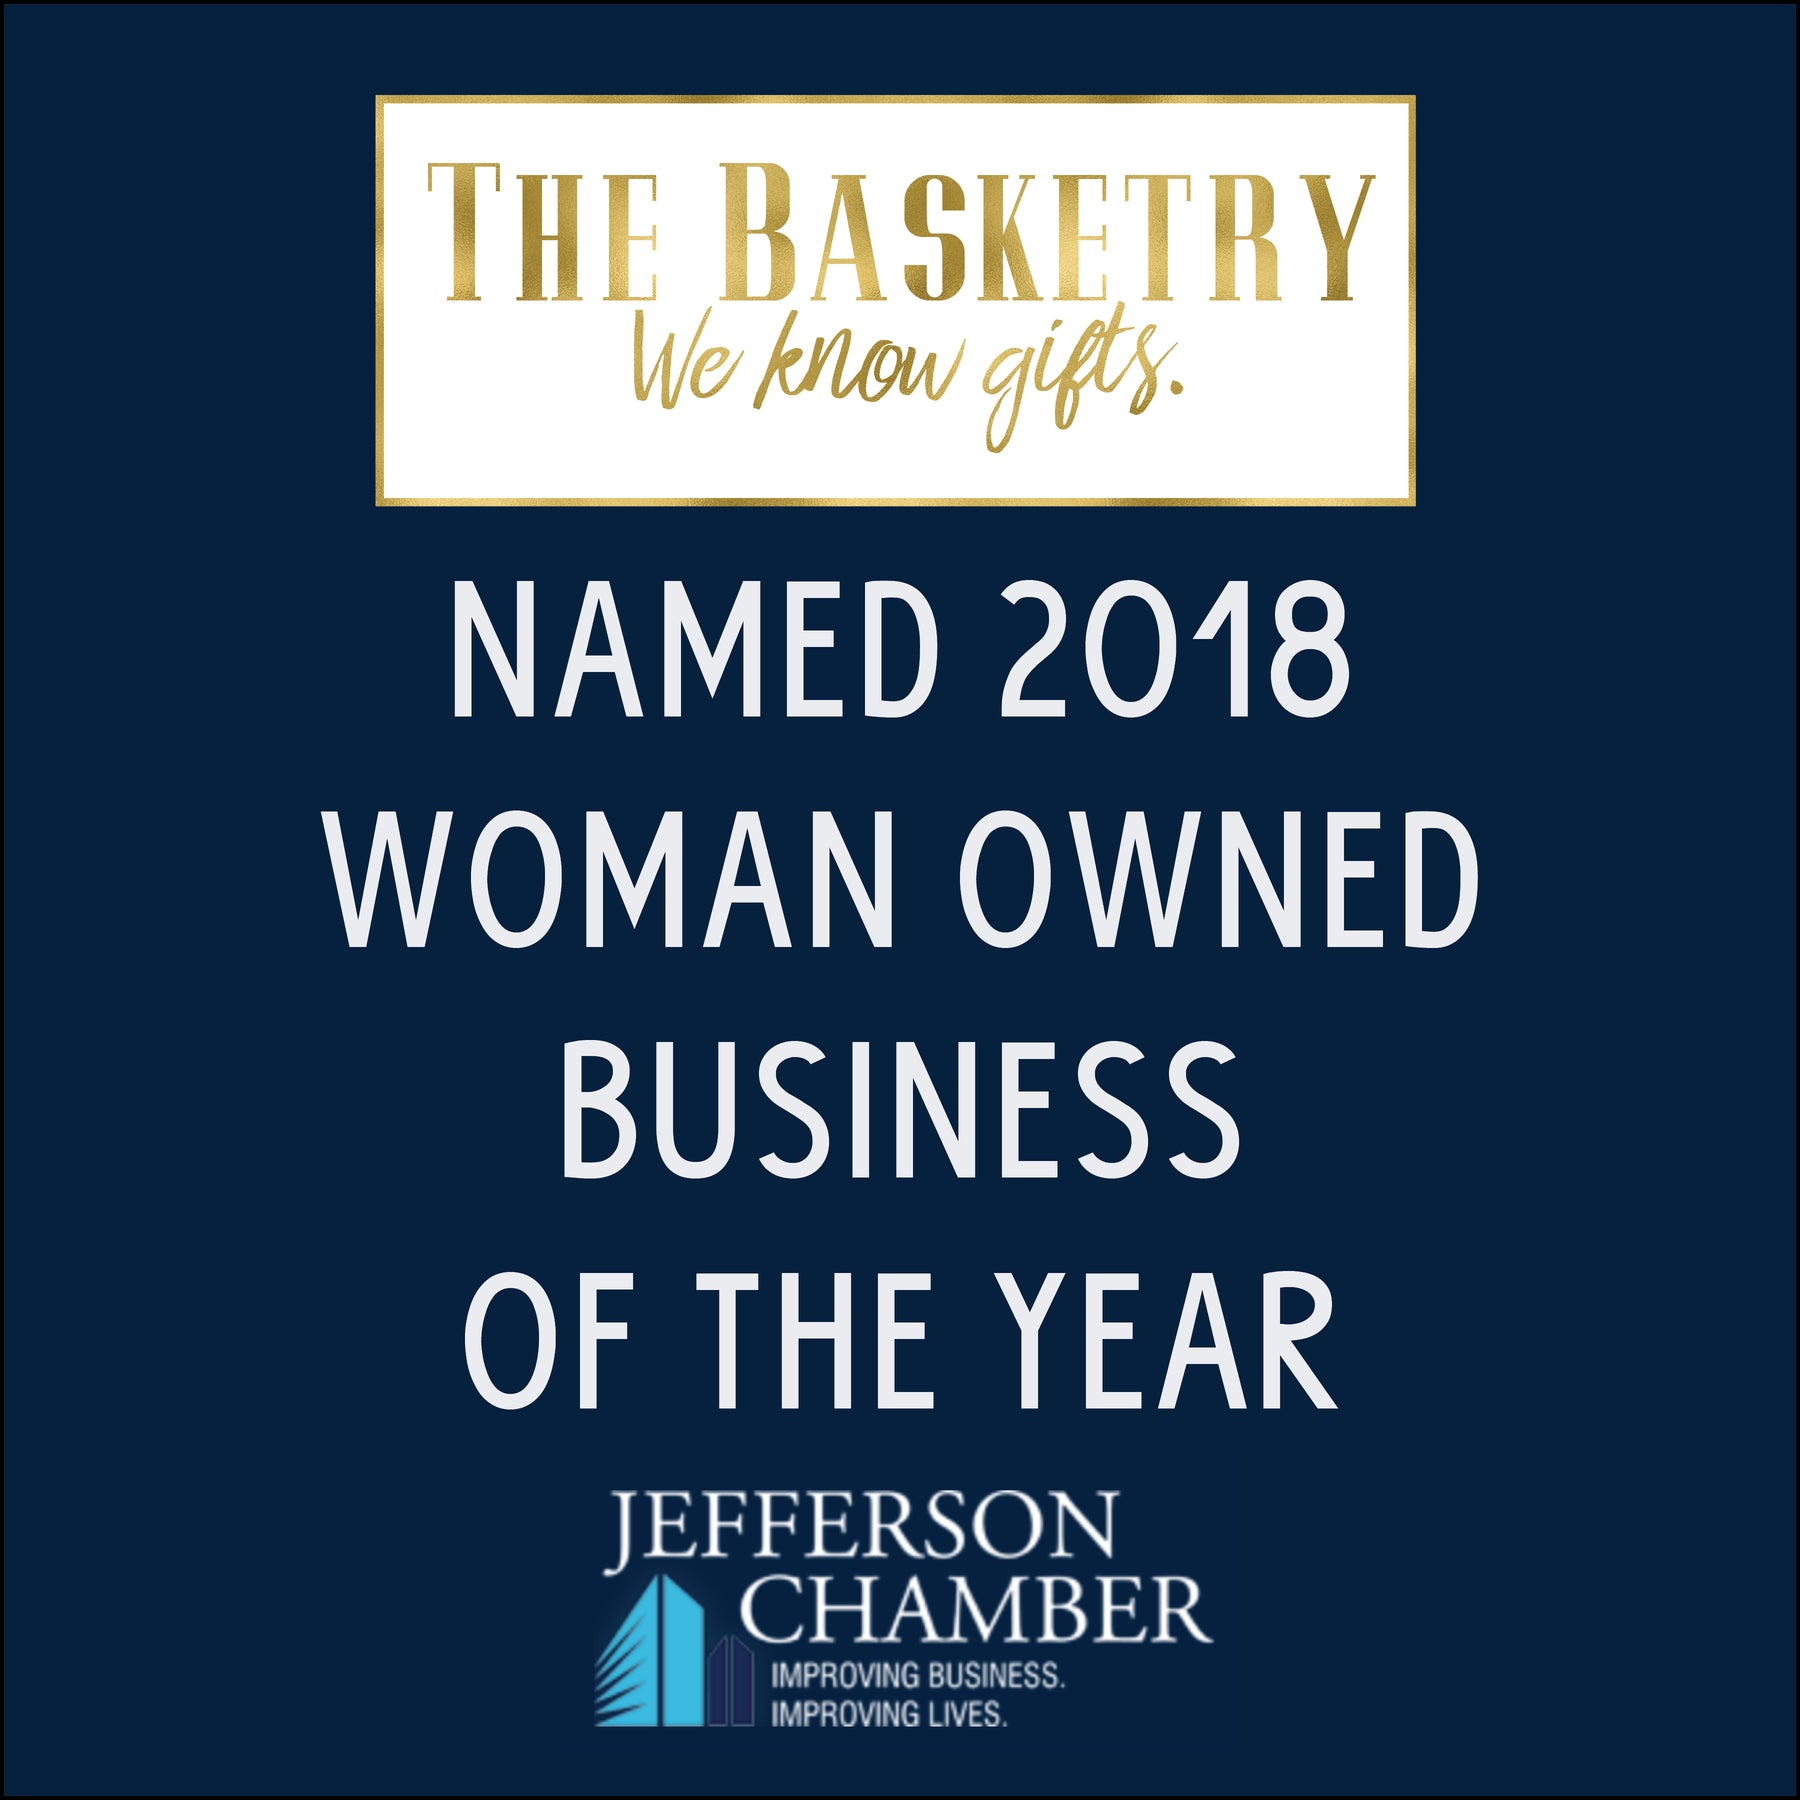 Woman Owned Business of the Year!